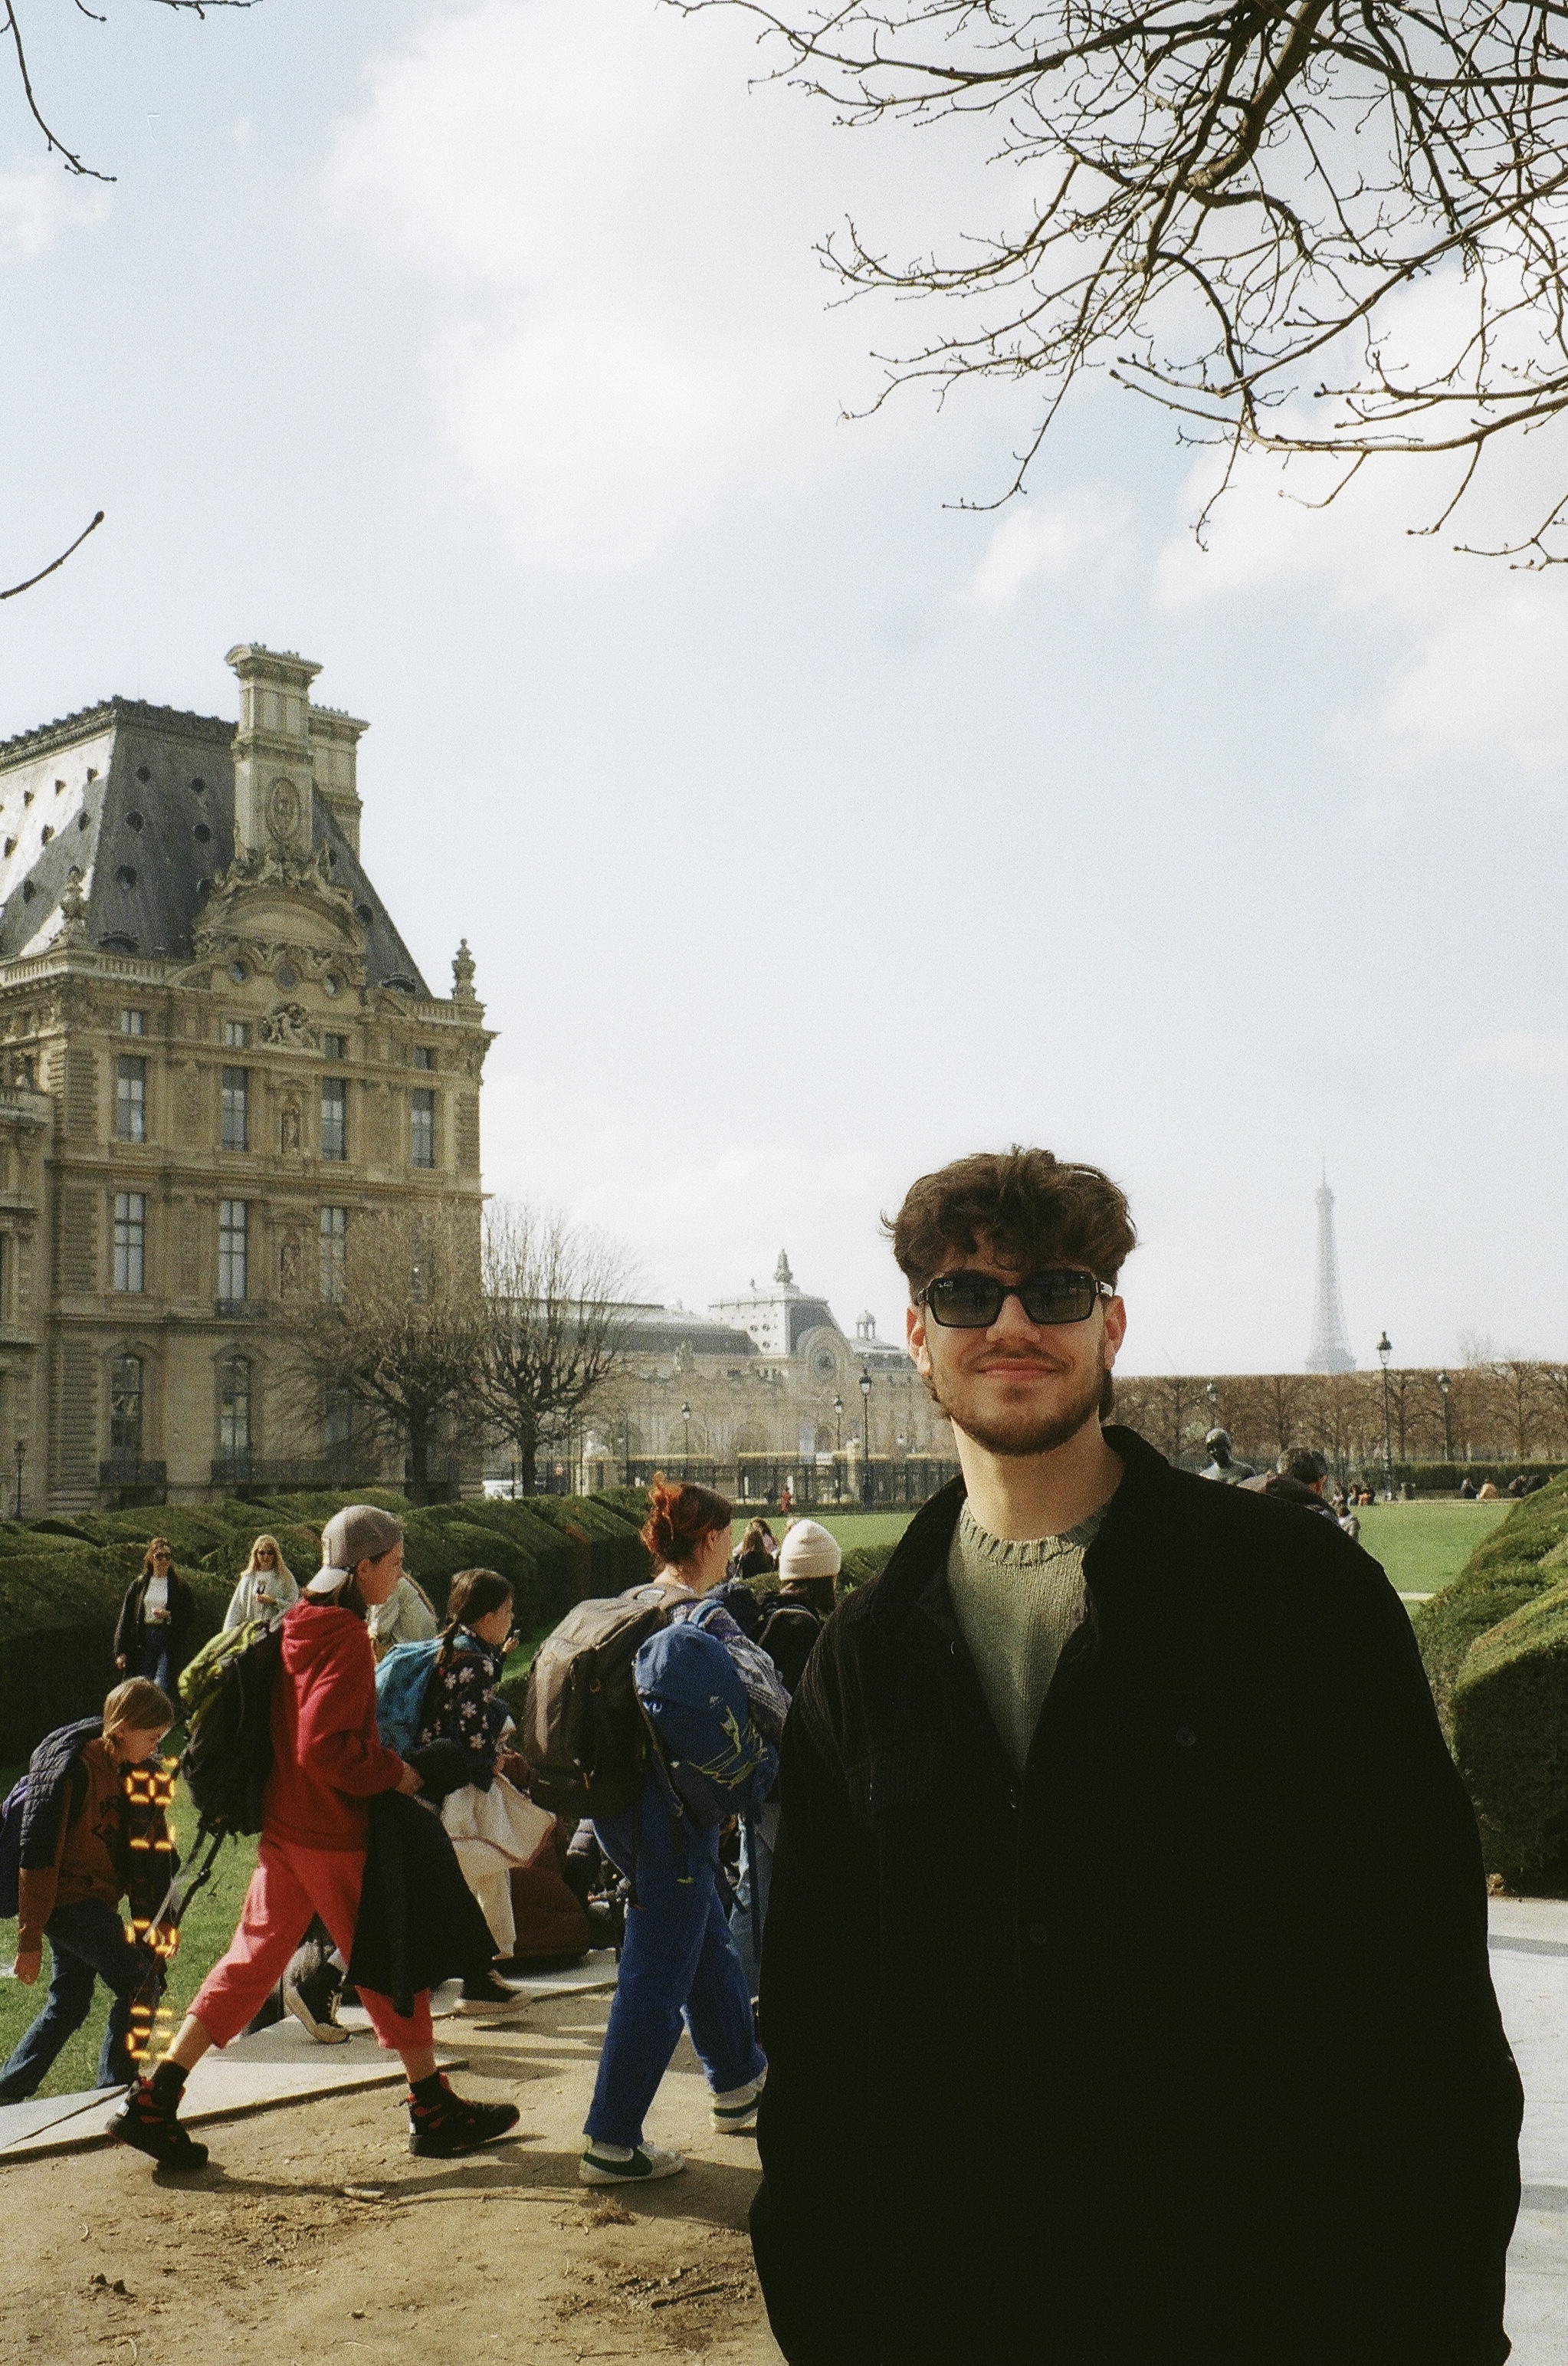 This is a photo of a young man with brown hair standing in front of the tulieres garden in Paris, with the Eiffel Tower in the distance. He is wearing a green ralph lauren sweater with black sunglasses on.